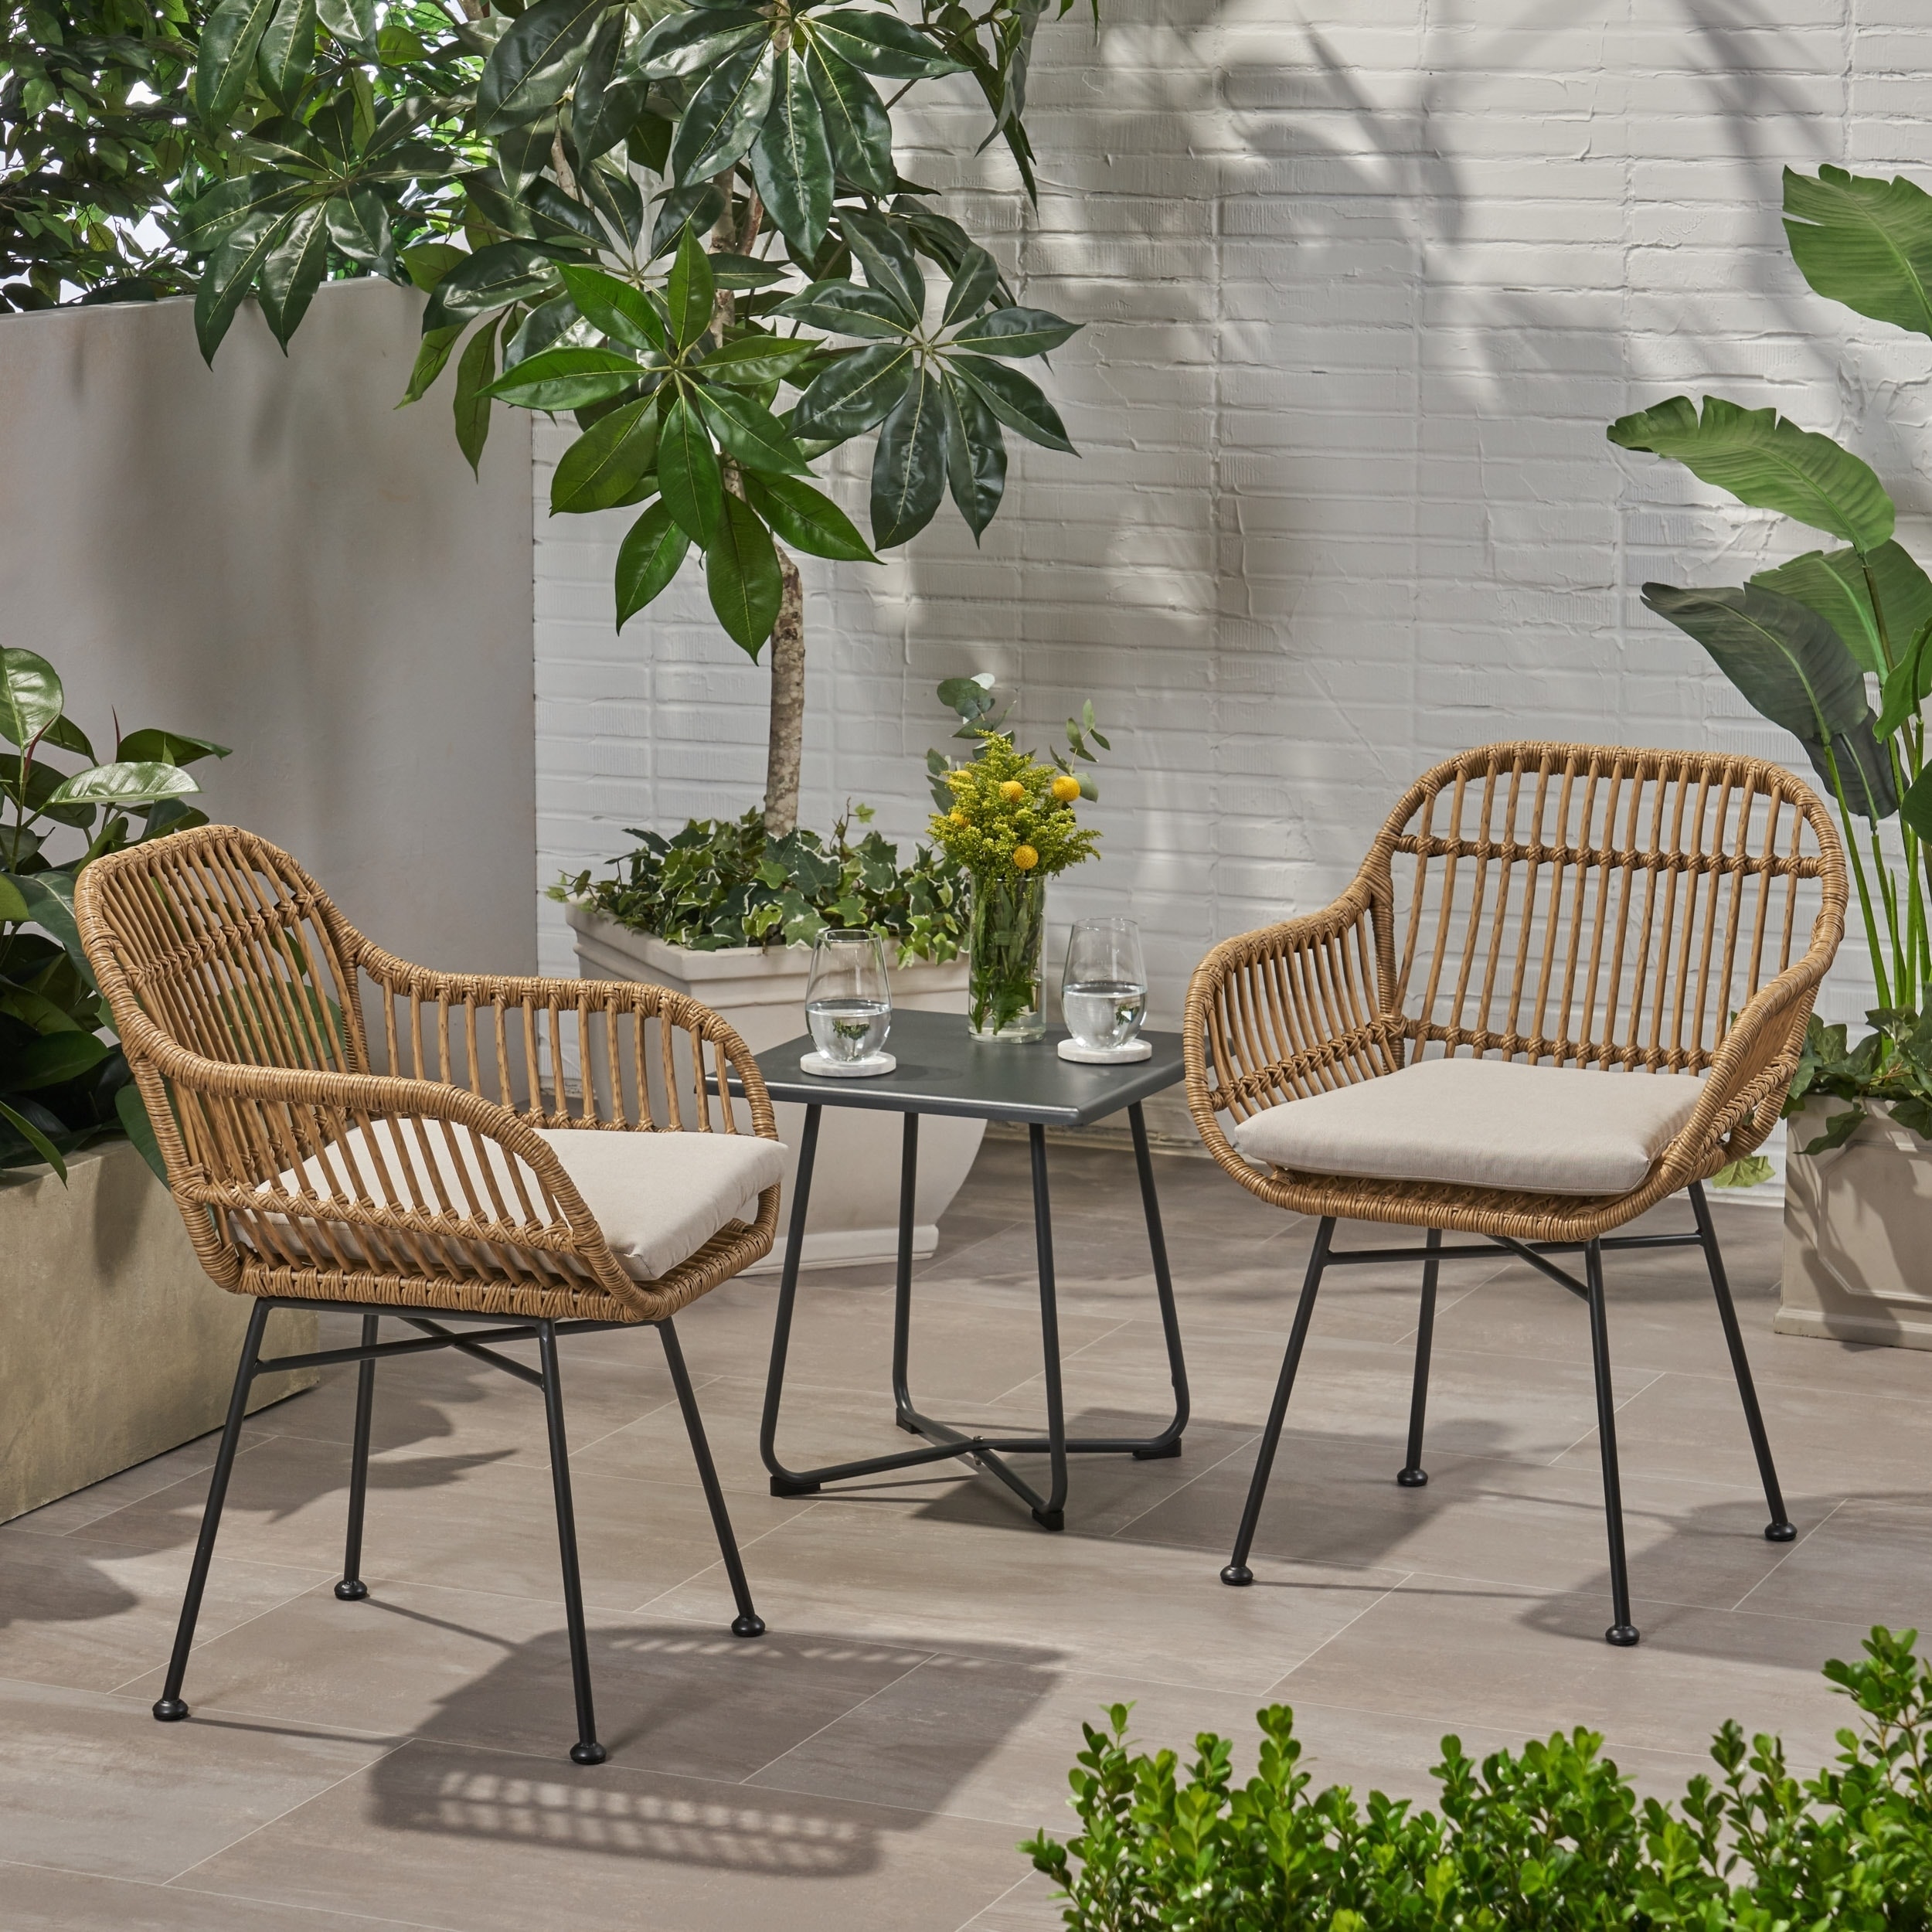 Orlando Outdoor Woven Faux Rattan Chairs With Cushions Set Of 2